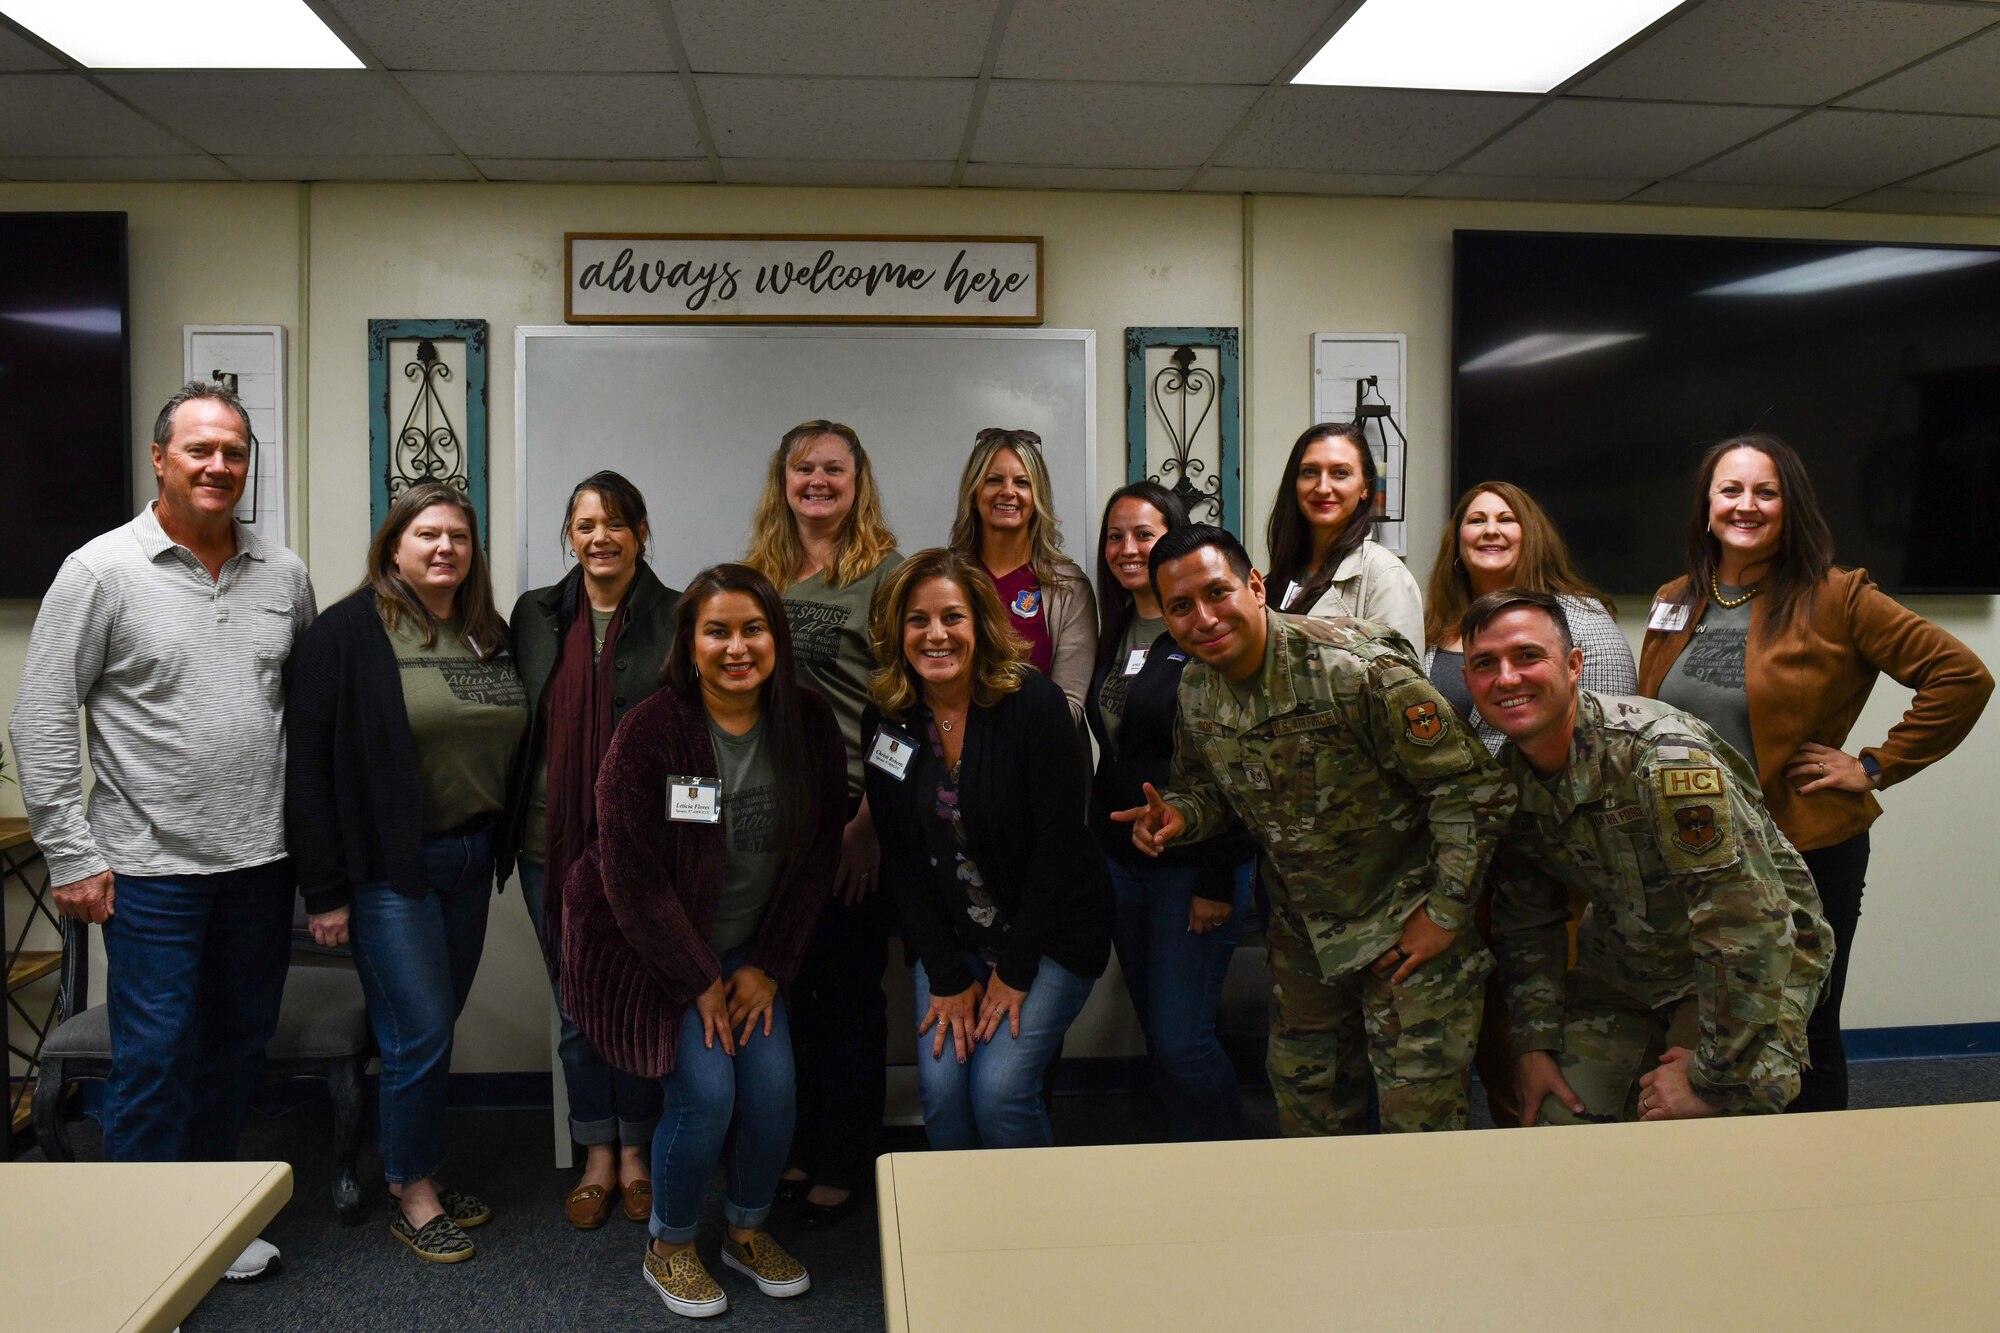 Leadership spouses from the 97th Air Mobility Wing pose for a photo with members of the community support group during a leadership spouse tour at Altus Air Force Base, Oklahoma, Oct. 19, 2022. Community and recreation programs are designed to promote fitness, maintain mission readiness and create a strong sense of military community that enhances the quality of life. (U.S. Air Force photo by Airman 1st Class Miyah Gray)